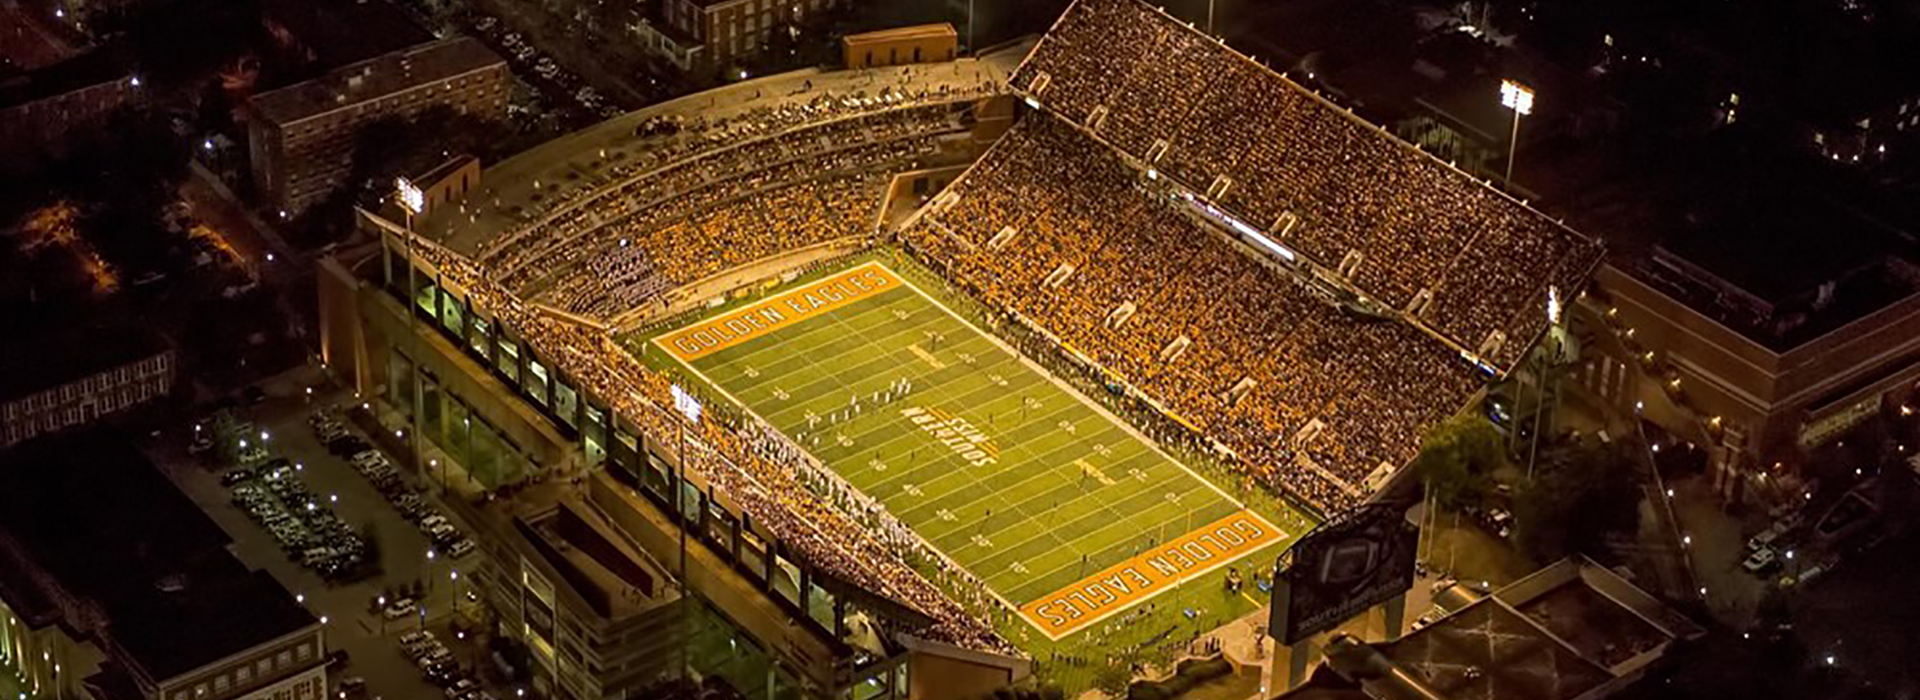 Tech adds Southern Miss to 2020 football slate